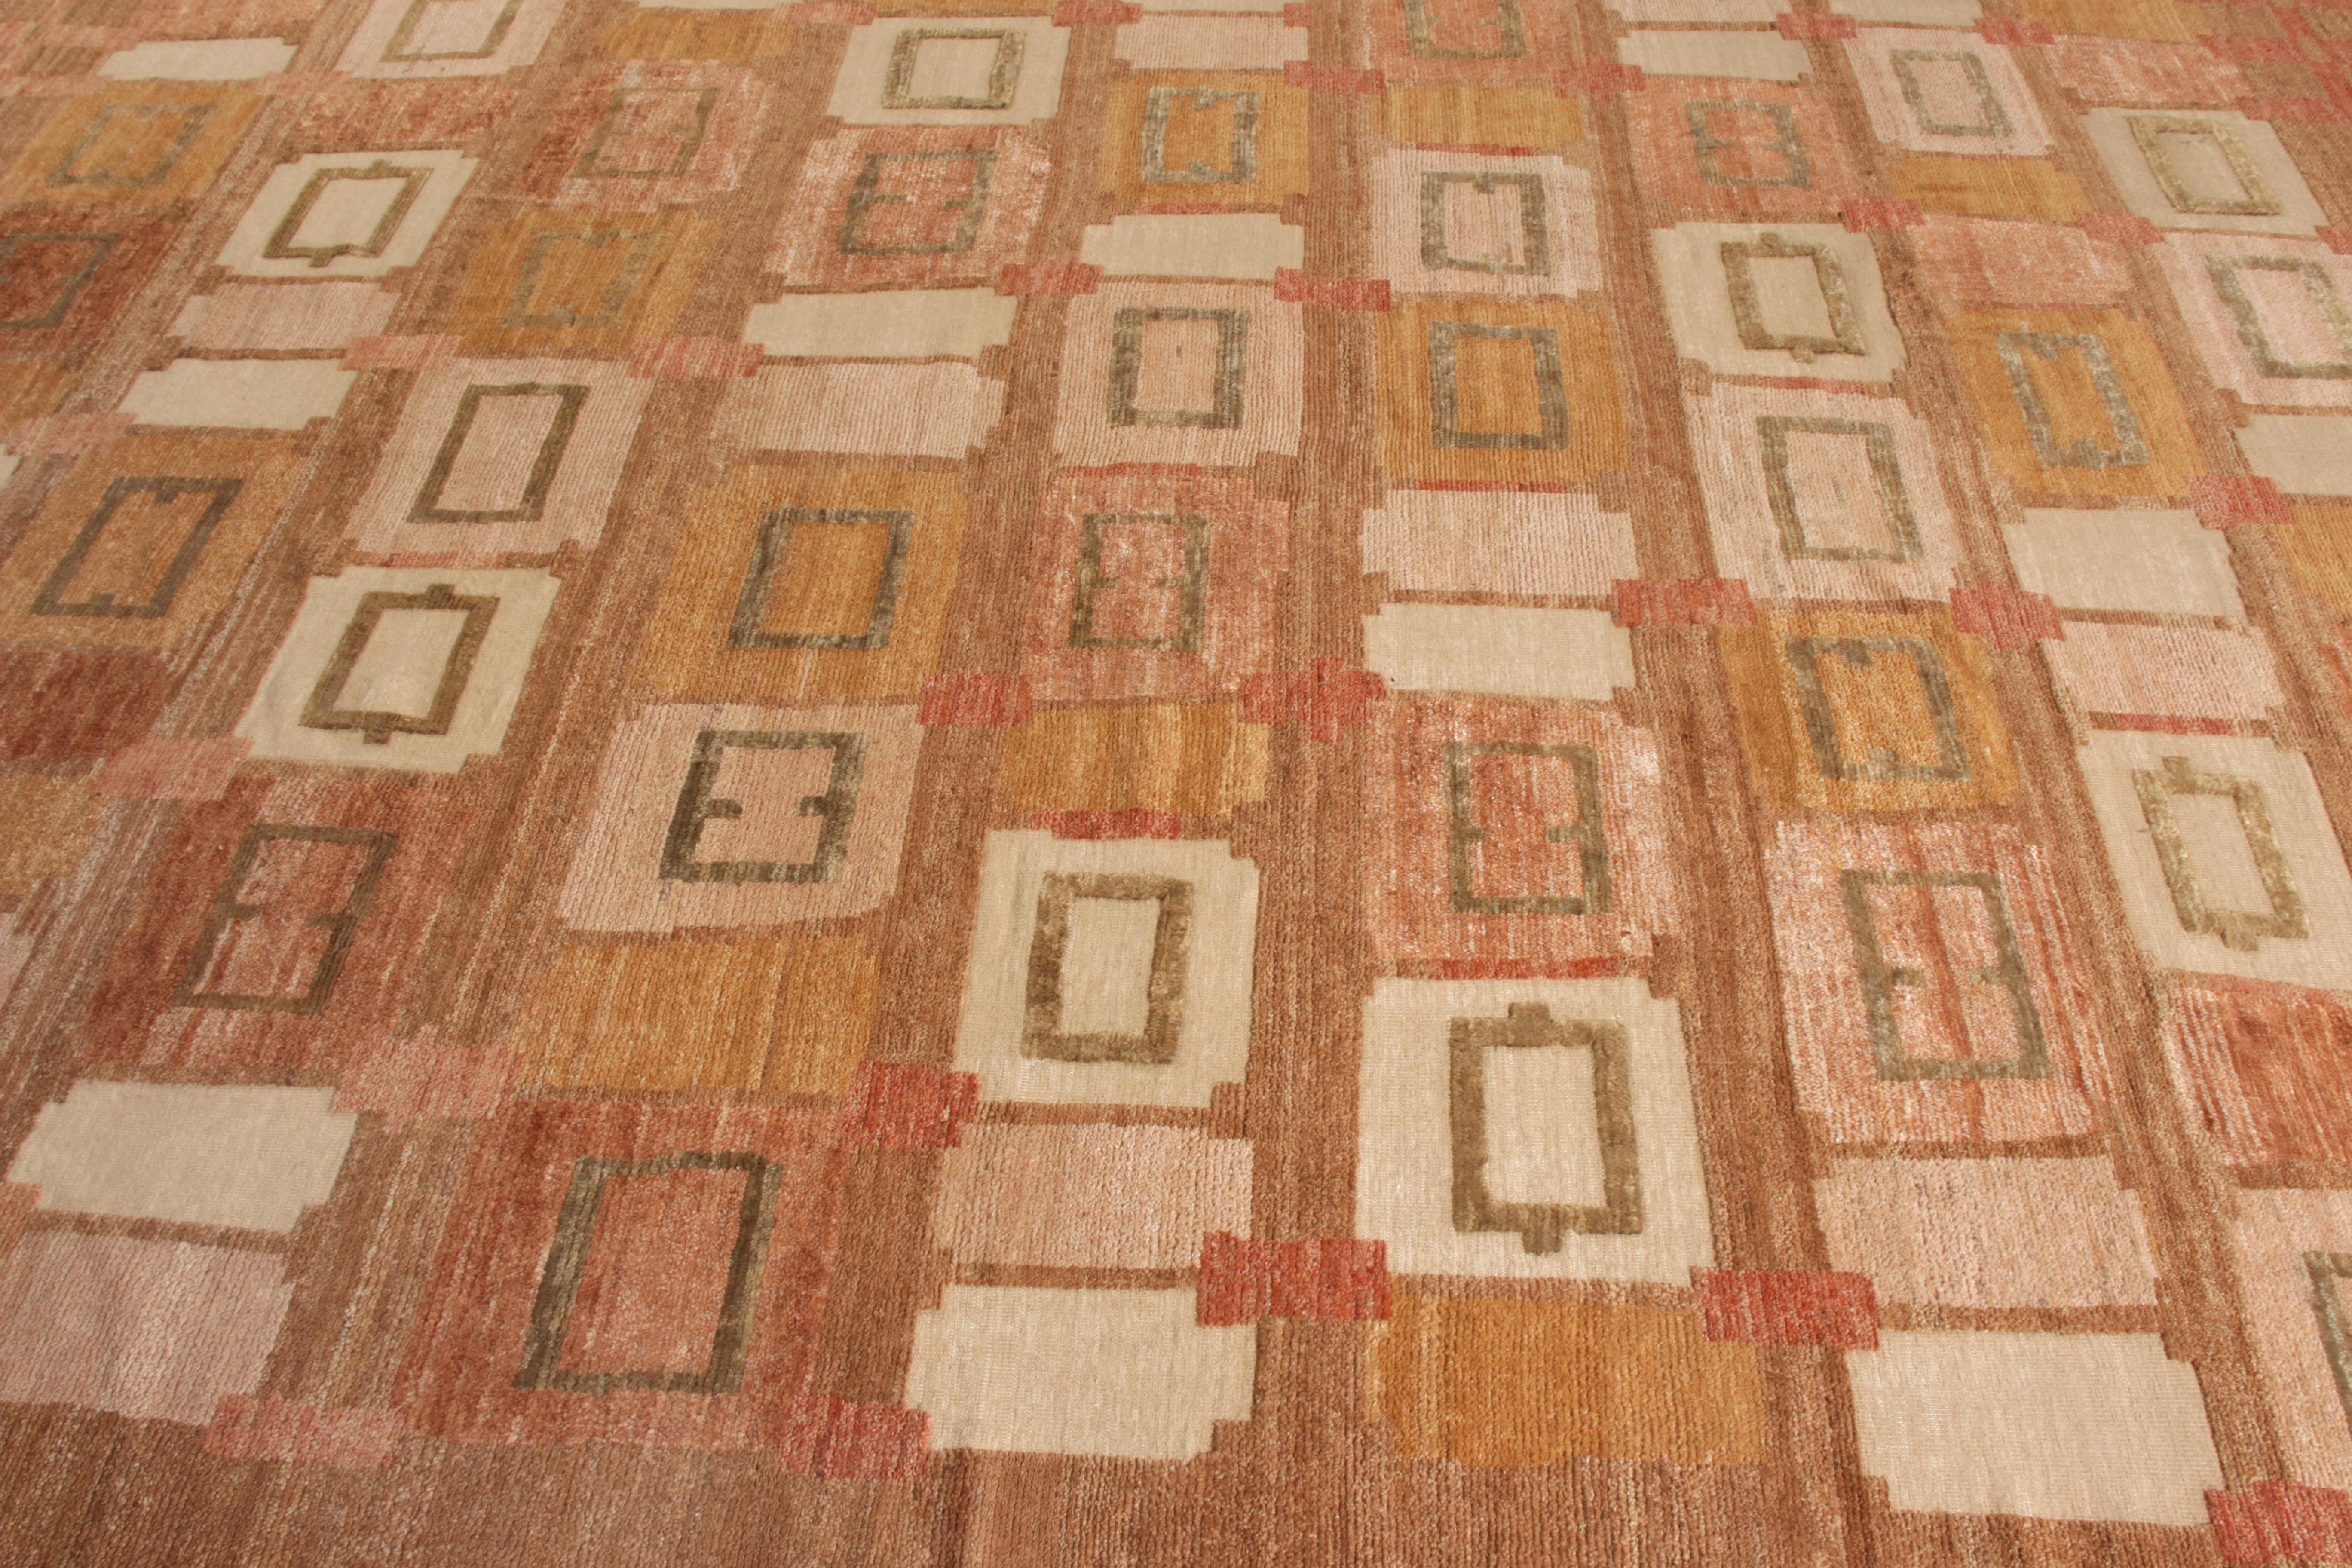 Indian Rug & Kilim’s Scandinavian Style Rug in Beige-Brown and Pink High-Low Pattern